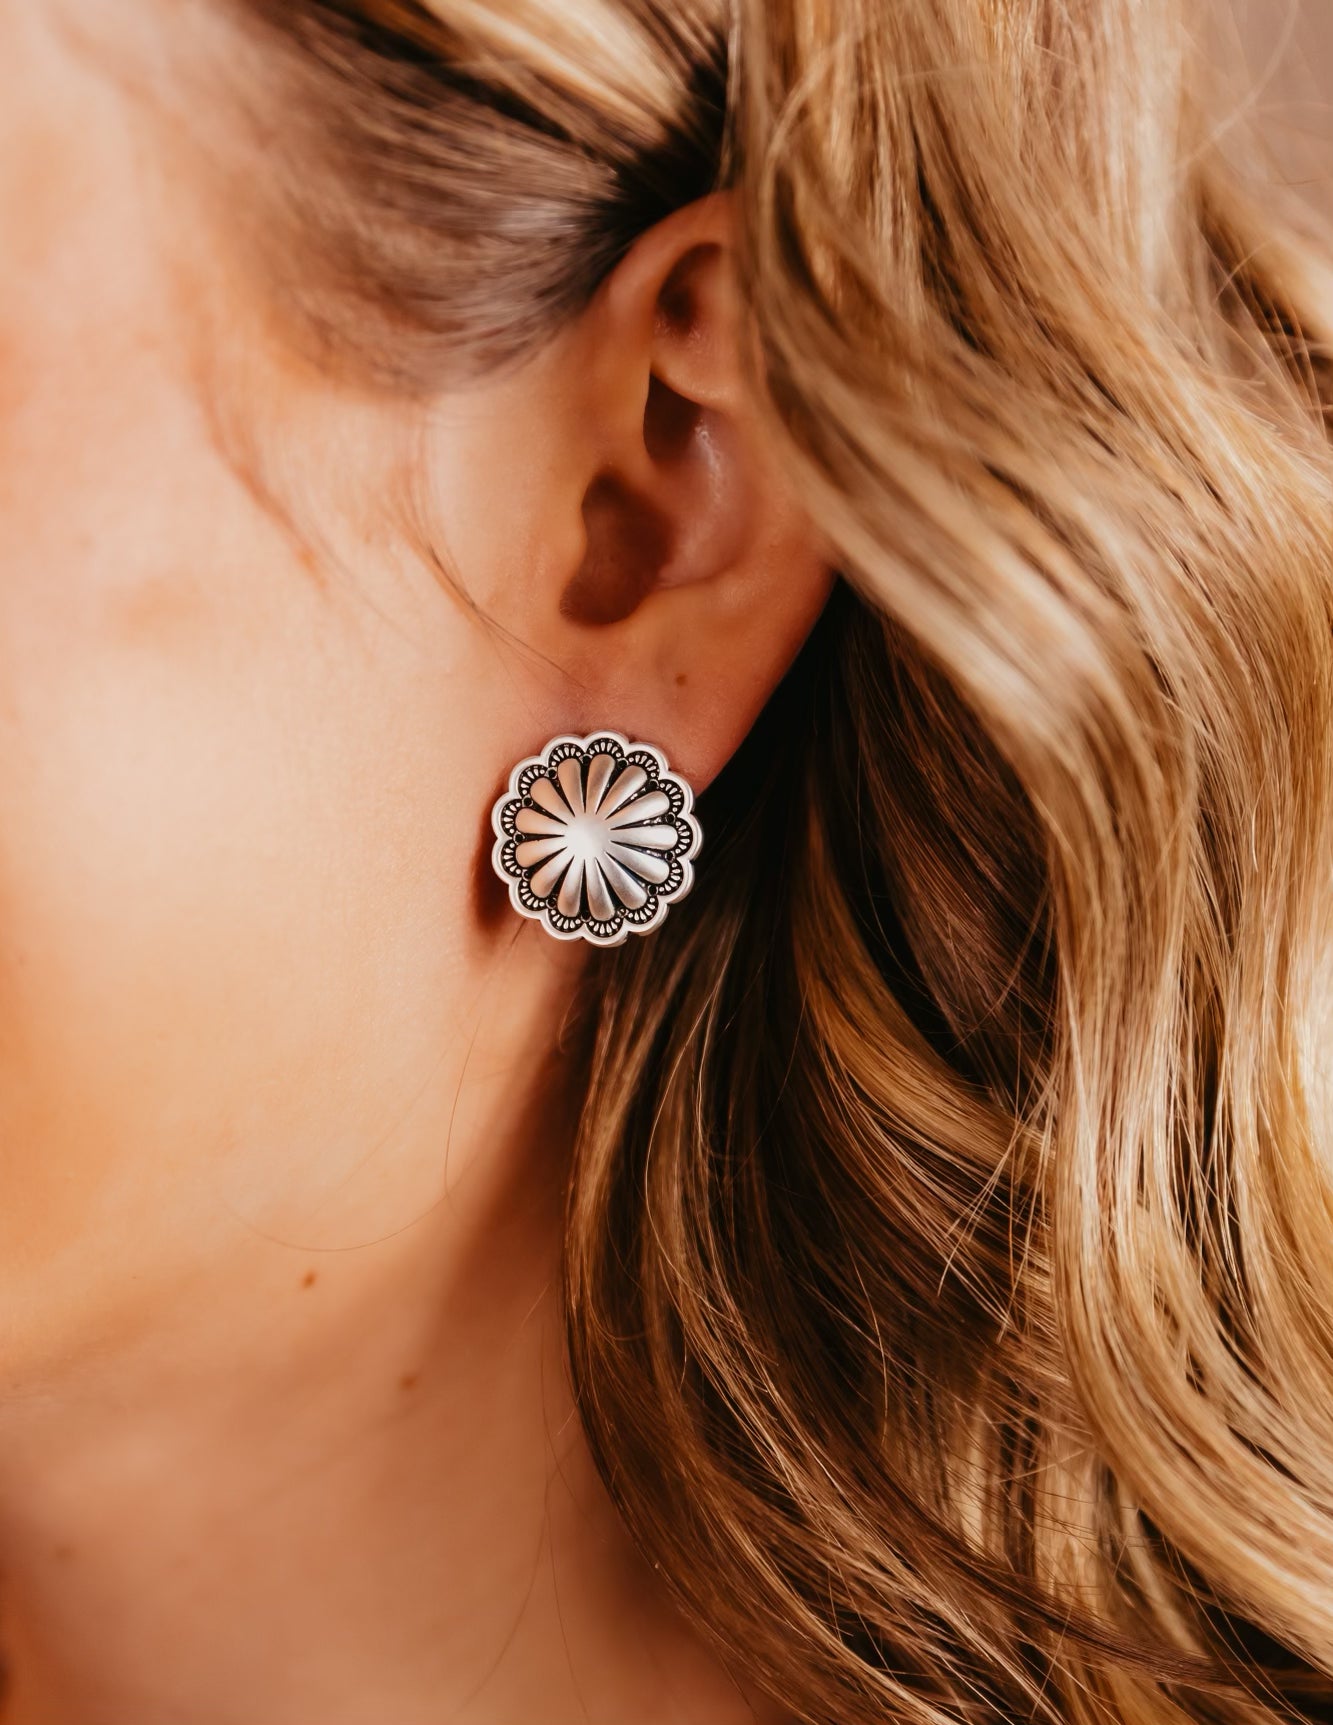 The Chesney Concho Earrings